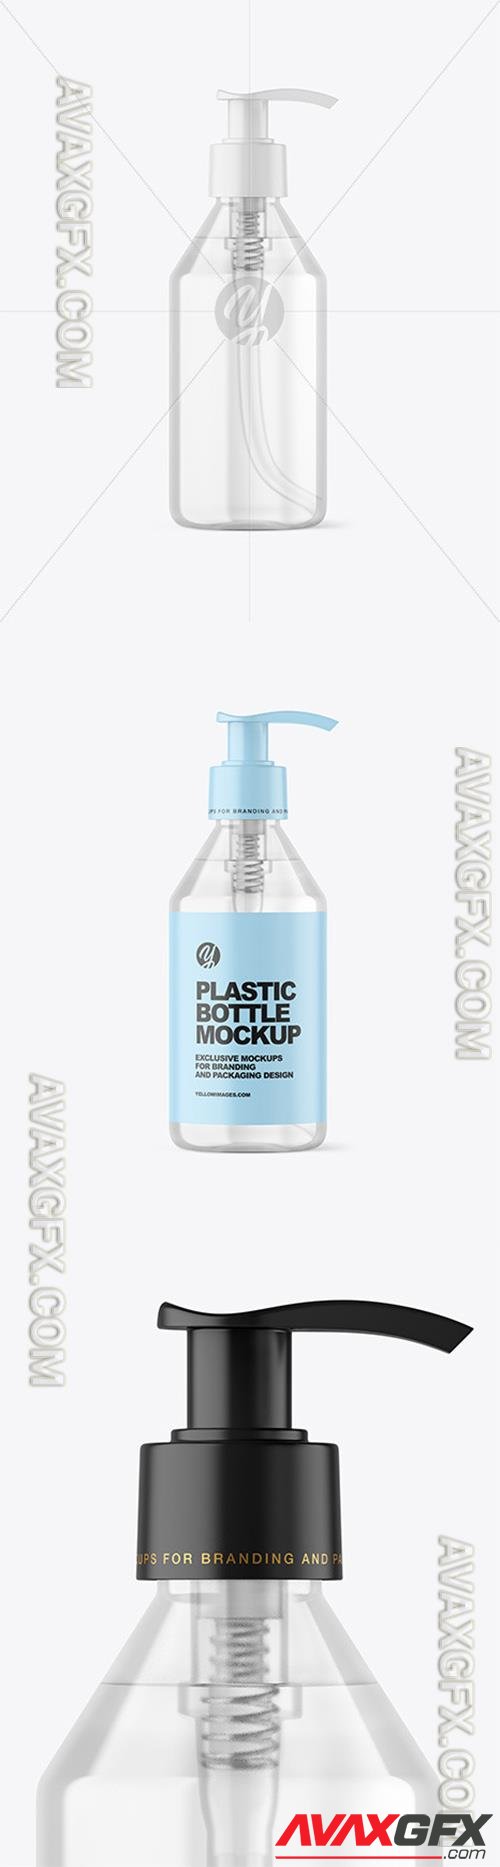 Clear Cosmetic Bottle with Pump Mockup 89326 TIF